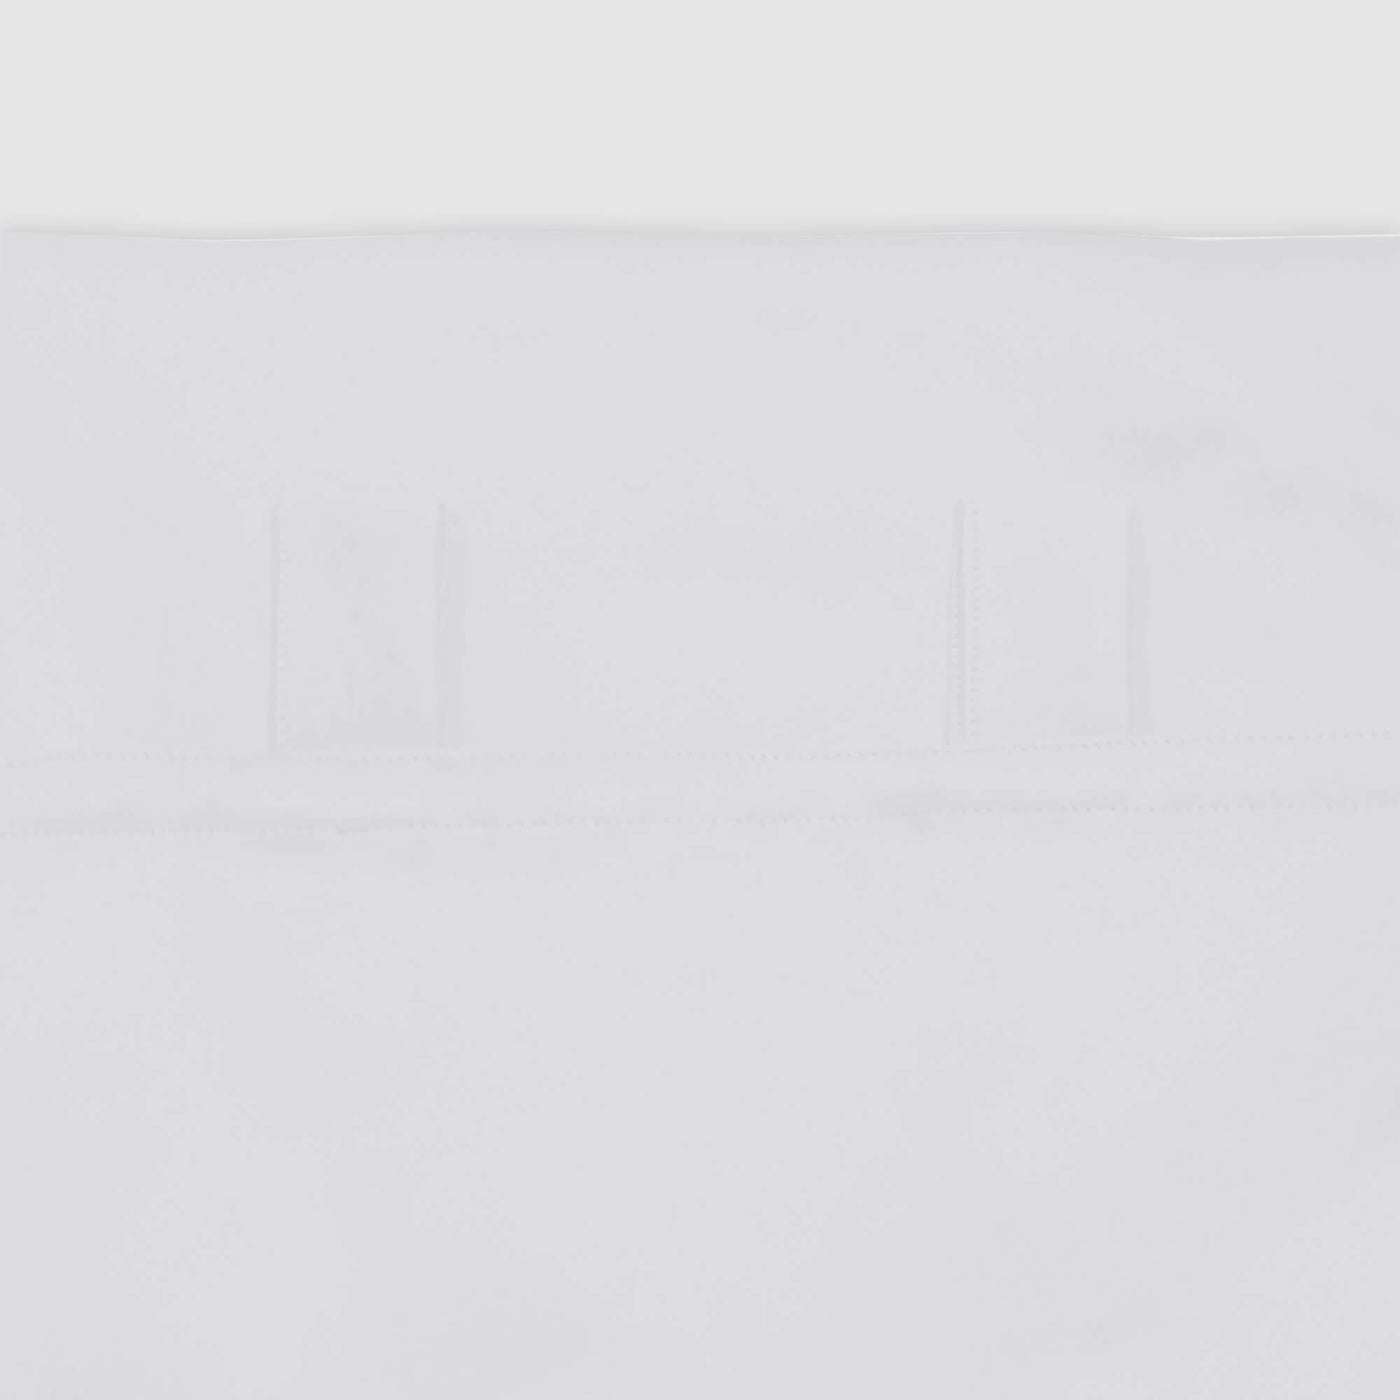 Heartcosy Blackout Curtains White - Tab Top